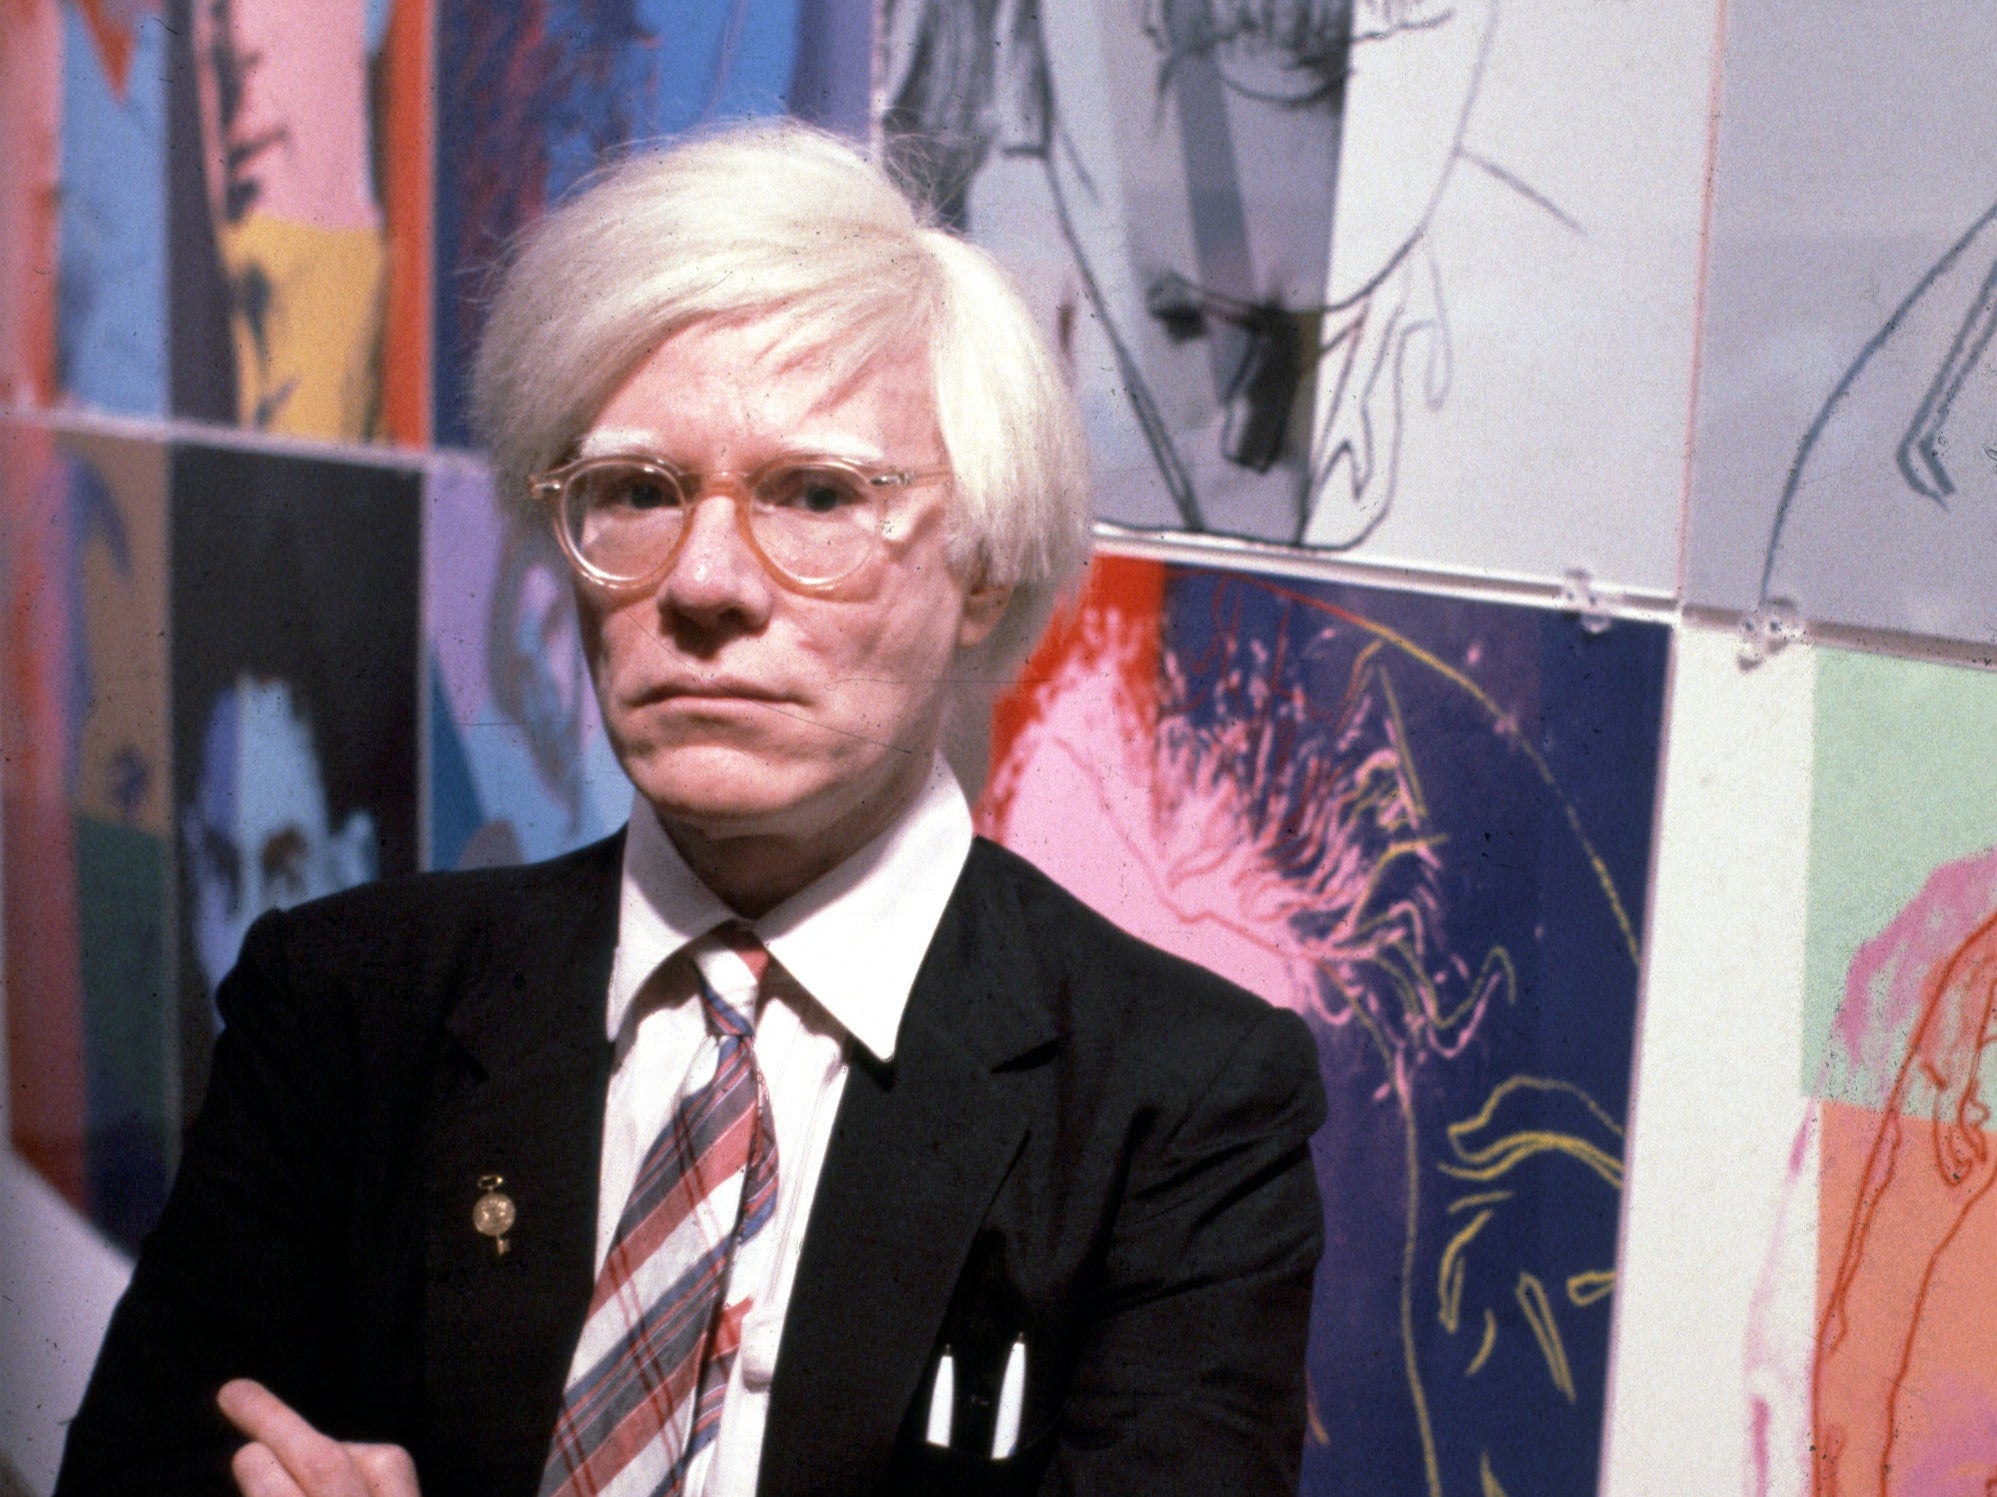 The American artist and filmmaker Andy Warhol with his paintings(1928 - 1987), December 15, 1980